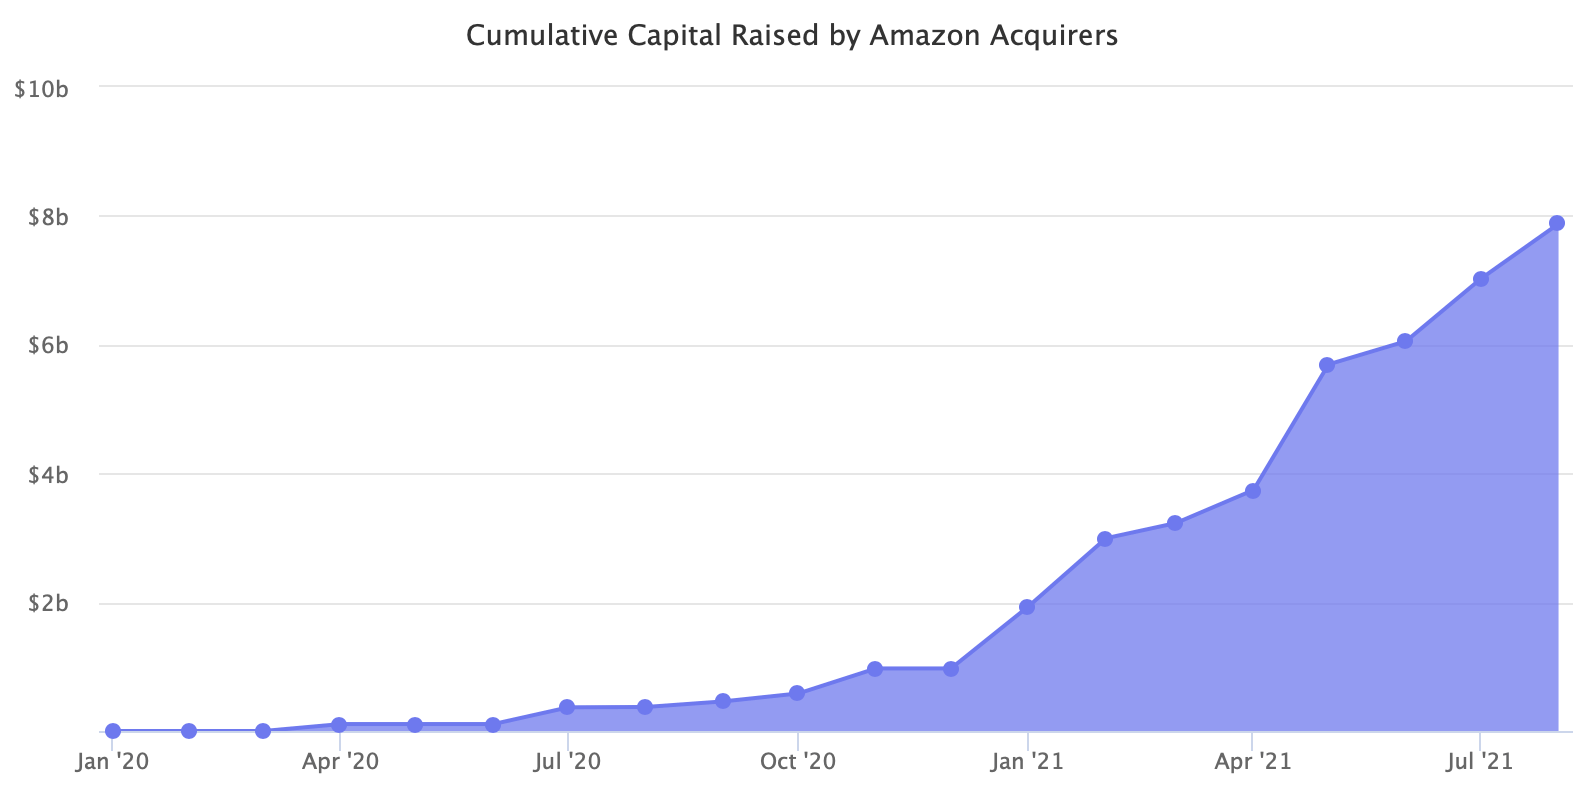 Cumulative Capital Raised by Amazon Acquirers